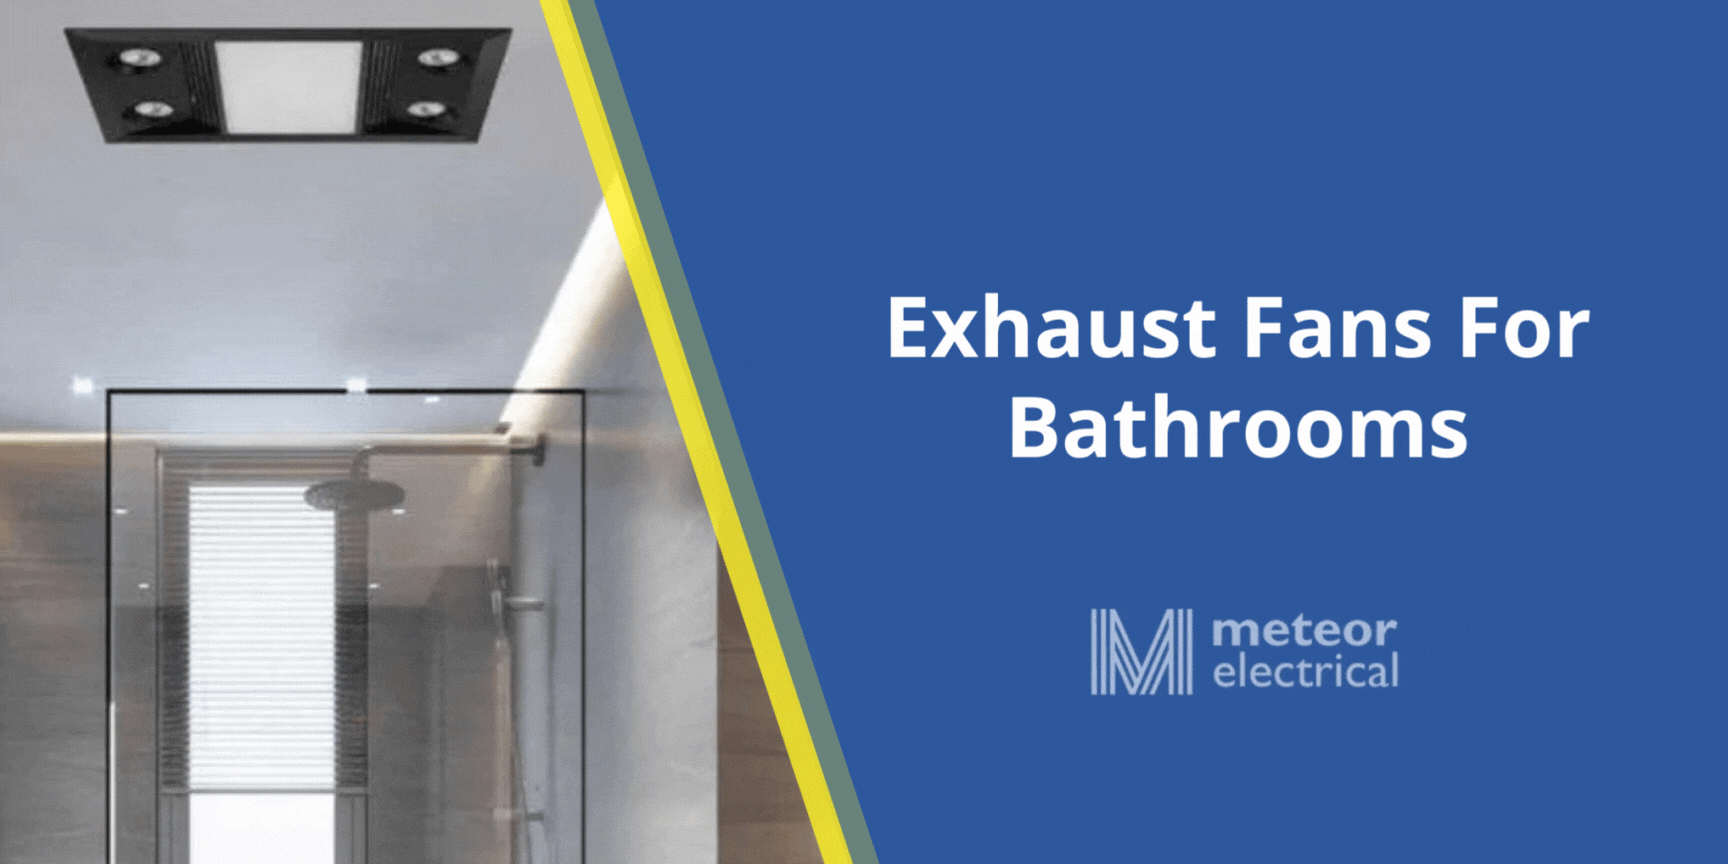 Exhaust Fans For Bathrooms